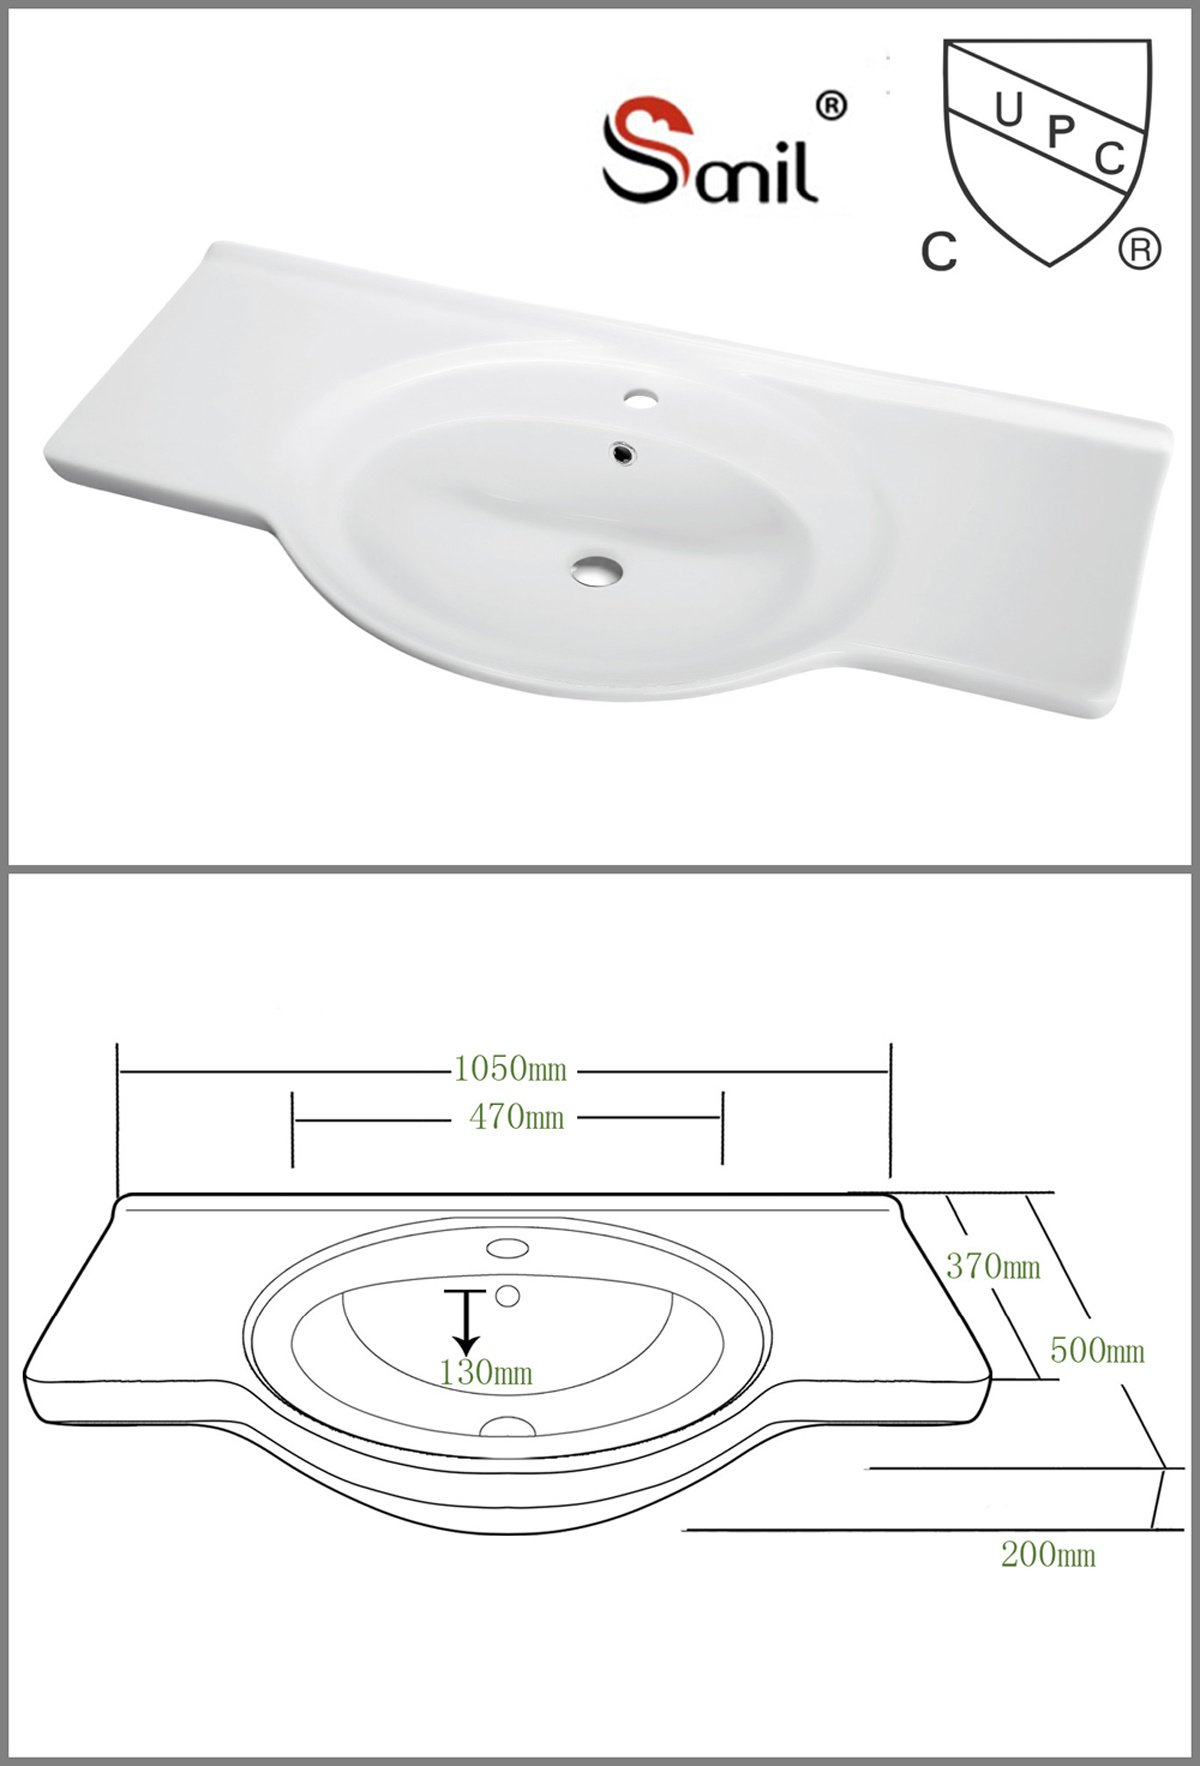 105cm China Bathroom Ceramic Cabinet Sink with Cupc Certification (SN1529-105)